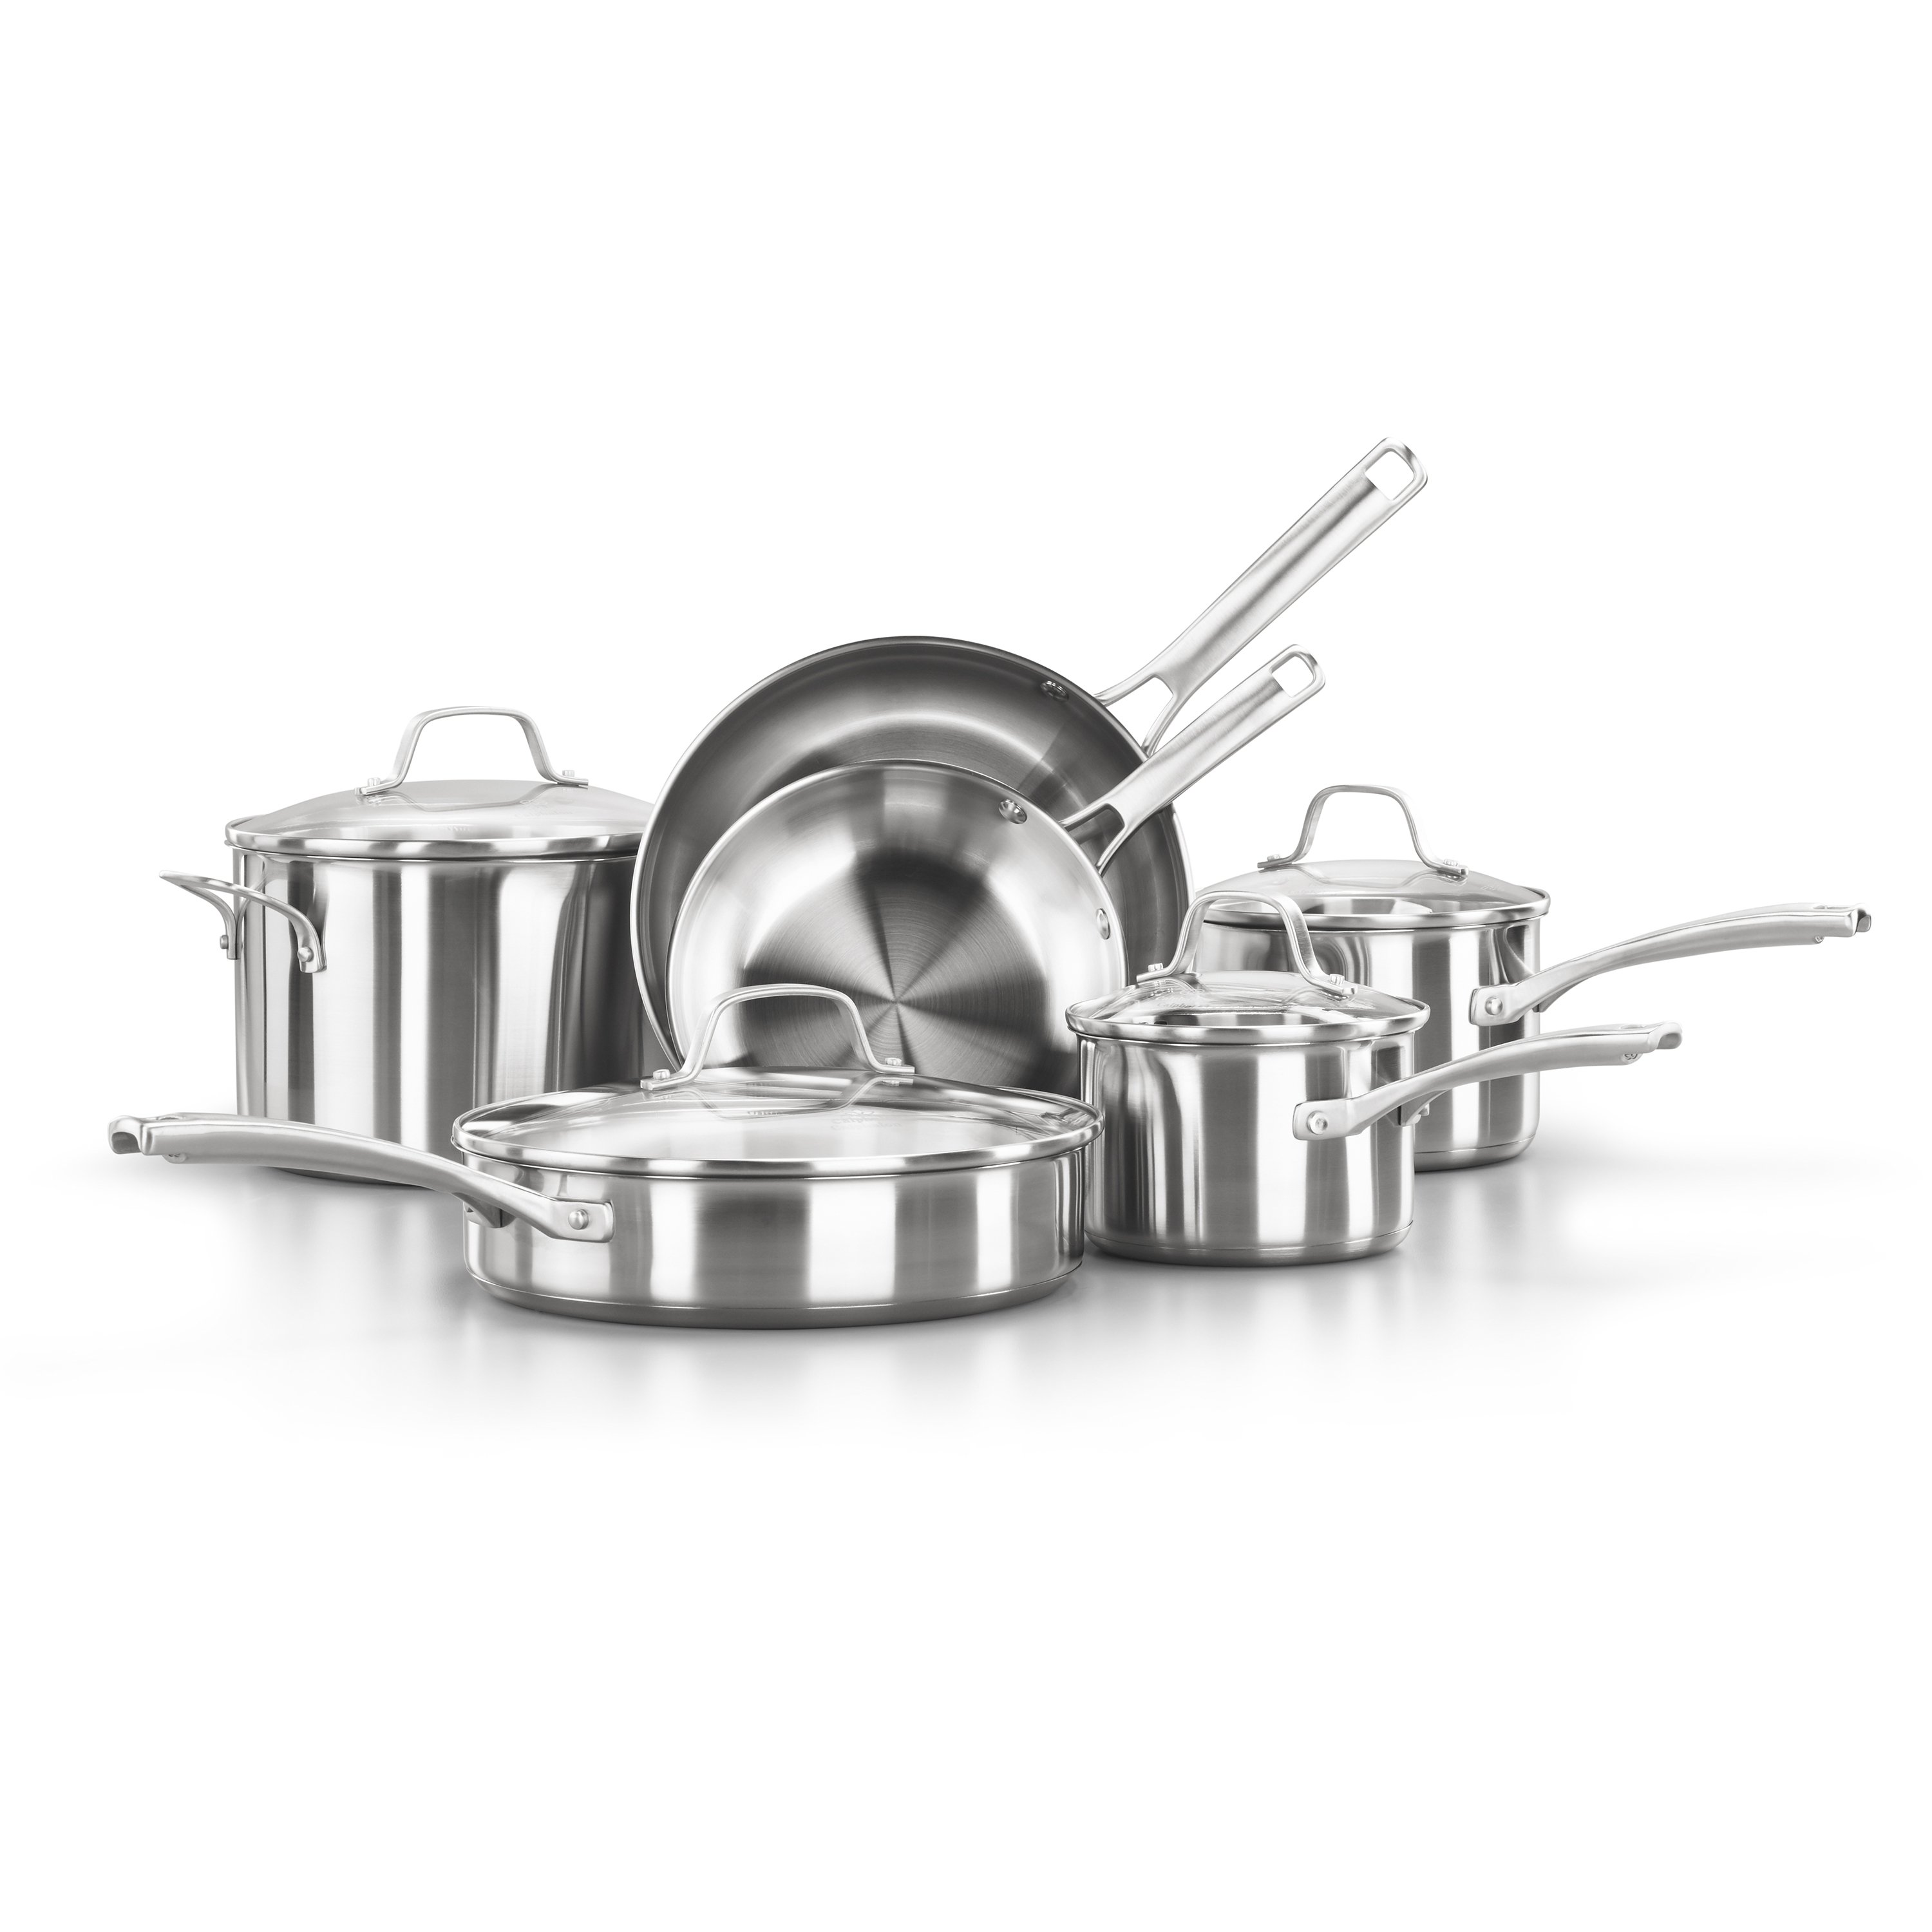 Stainless Steel Induction Cookware Set Best Kitchen Pots And Pans Sets 10-Piece 